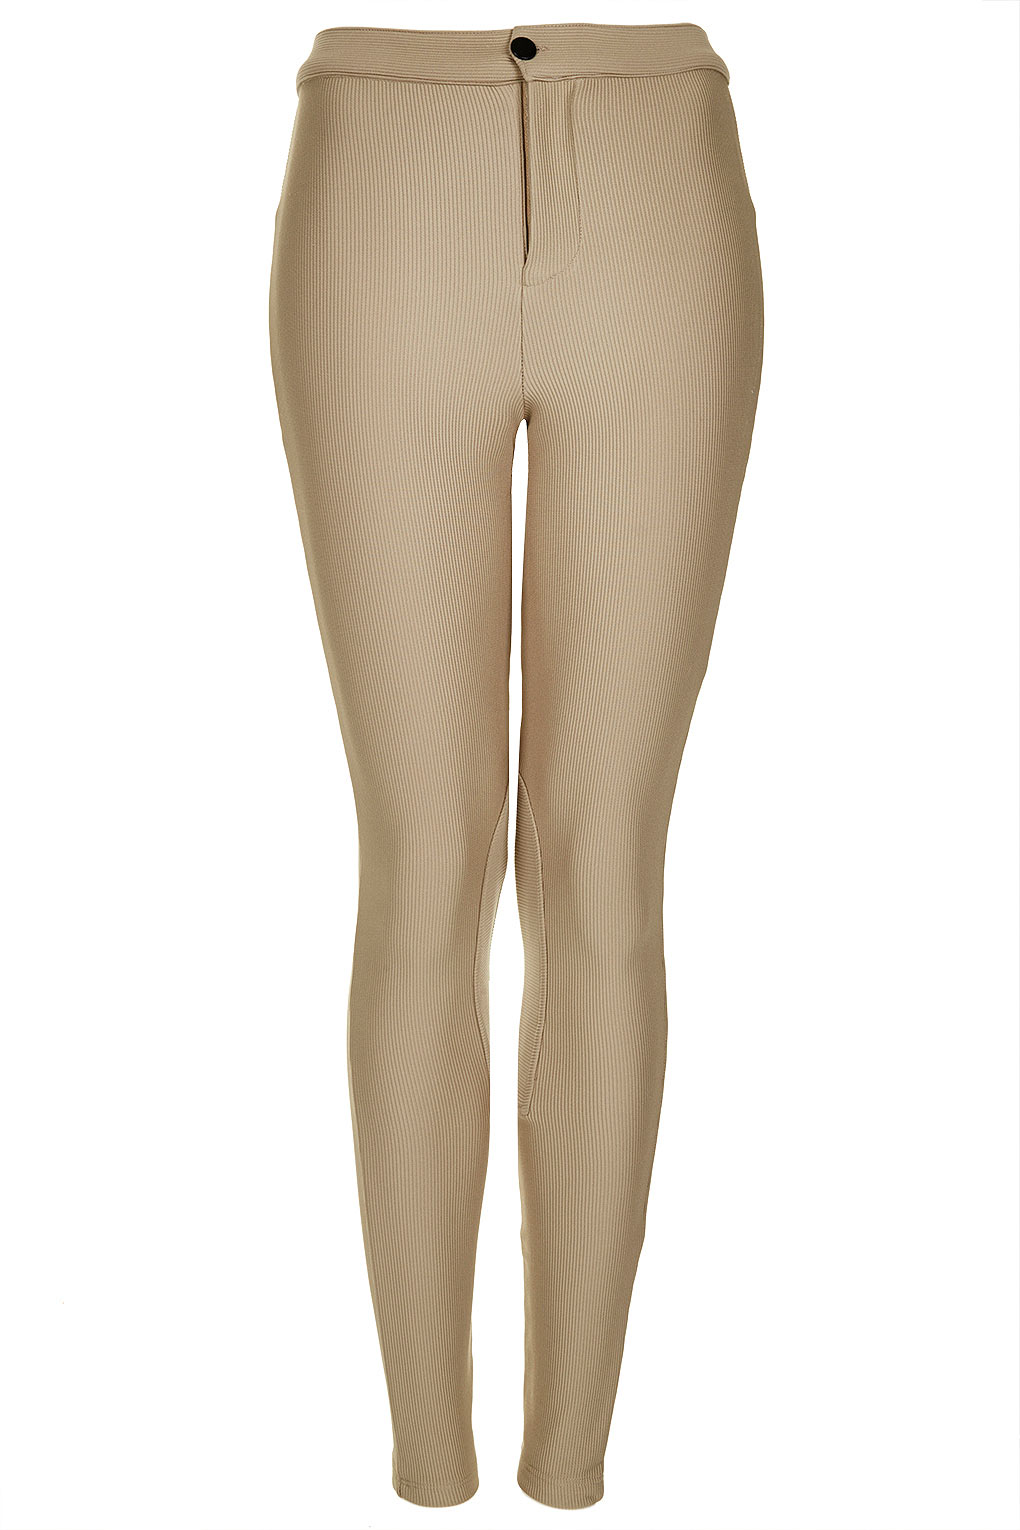 Lyst - TOPSHOP Ribbed Highwaisted Riding Pants in Brown